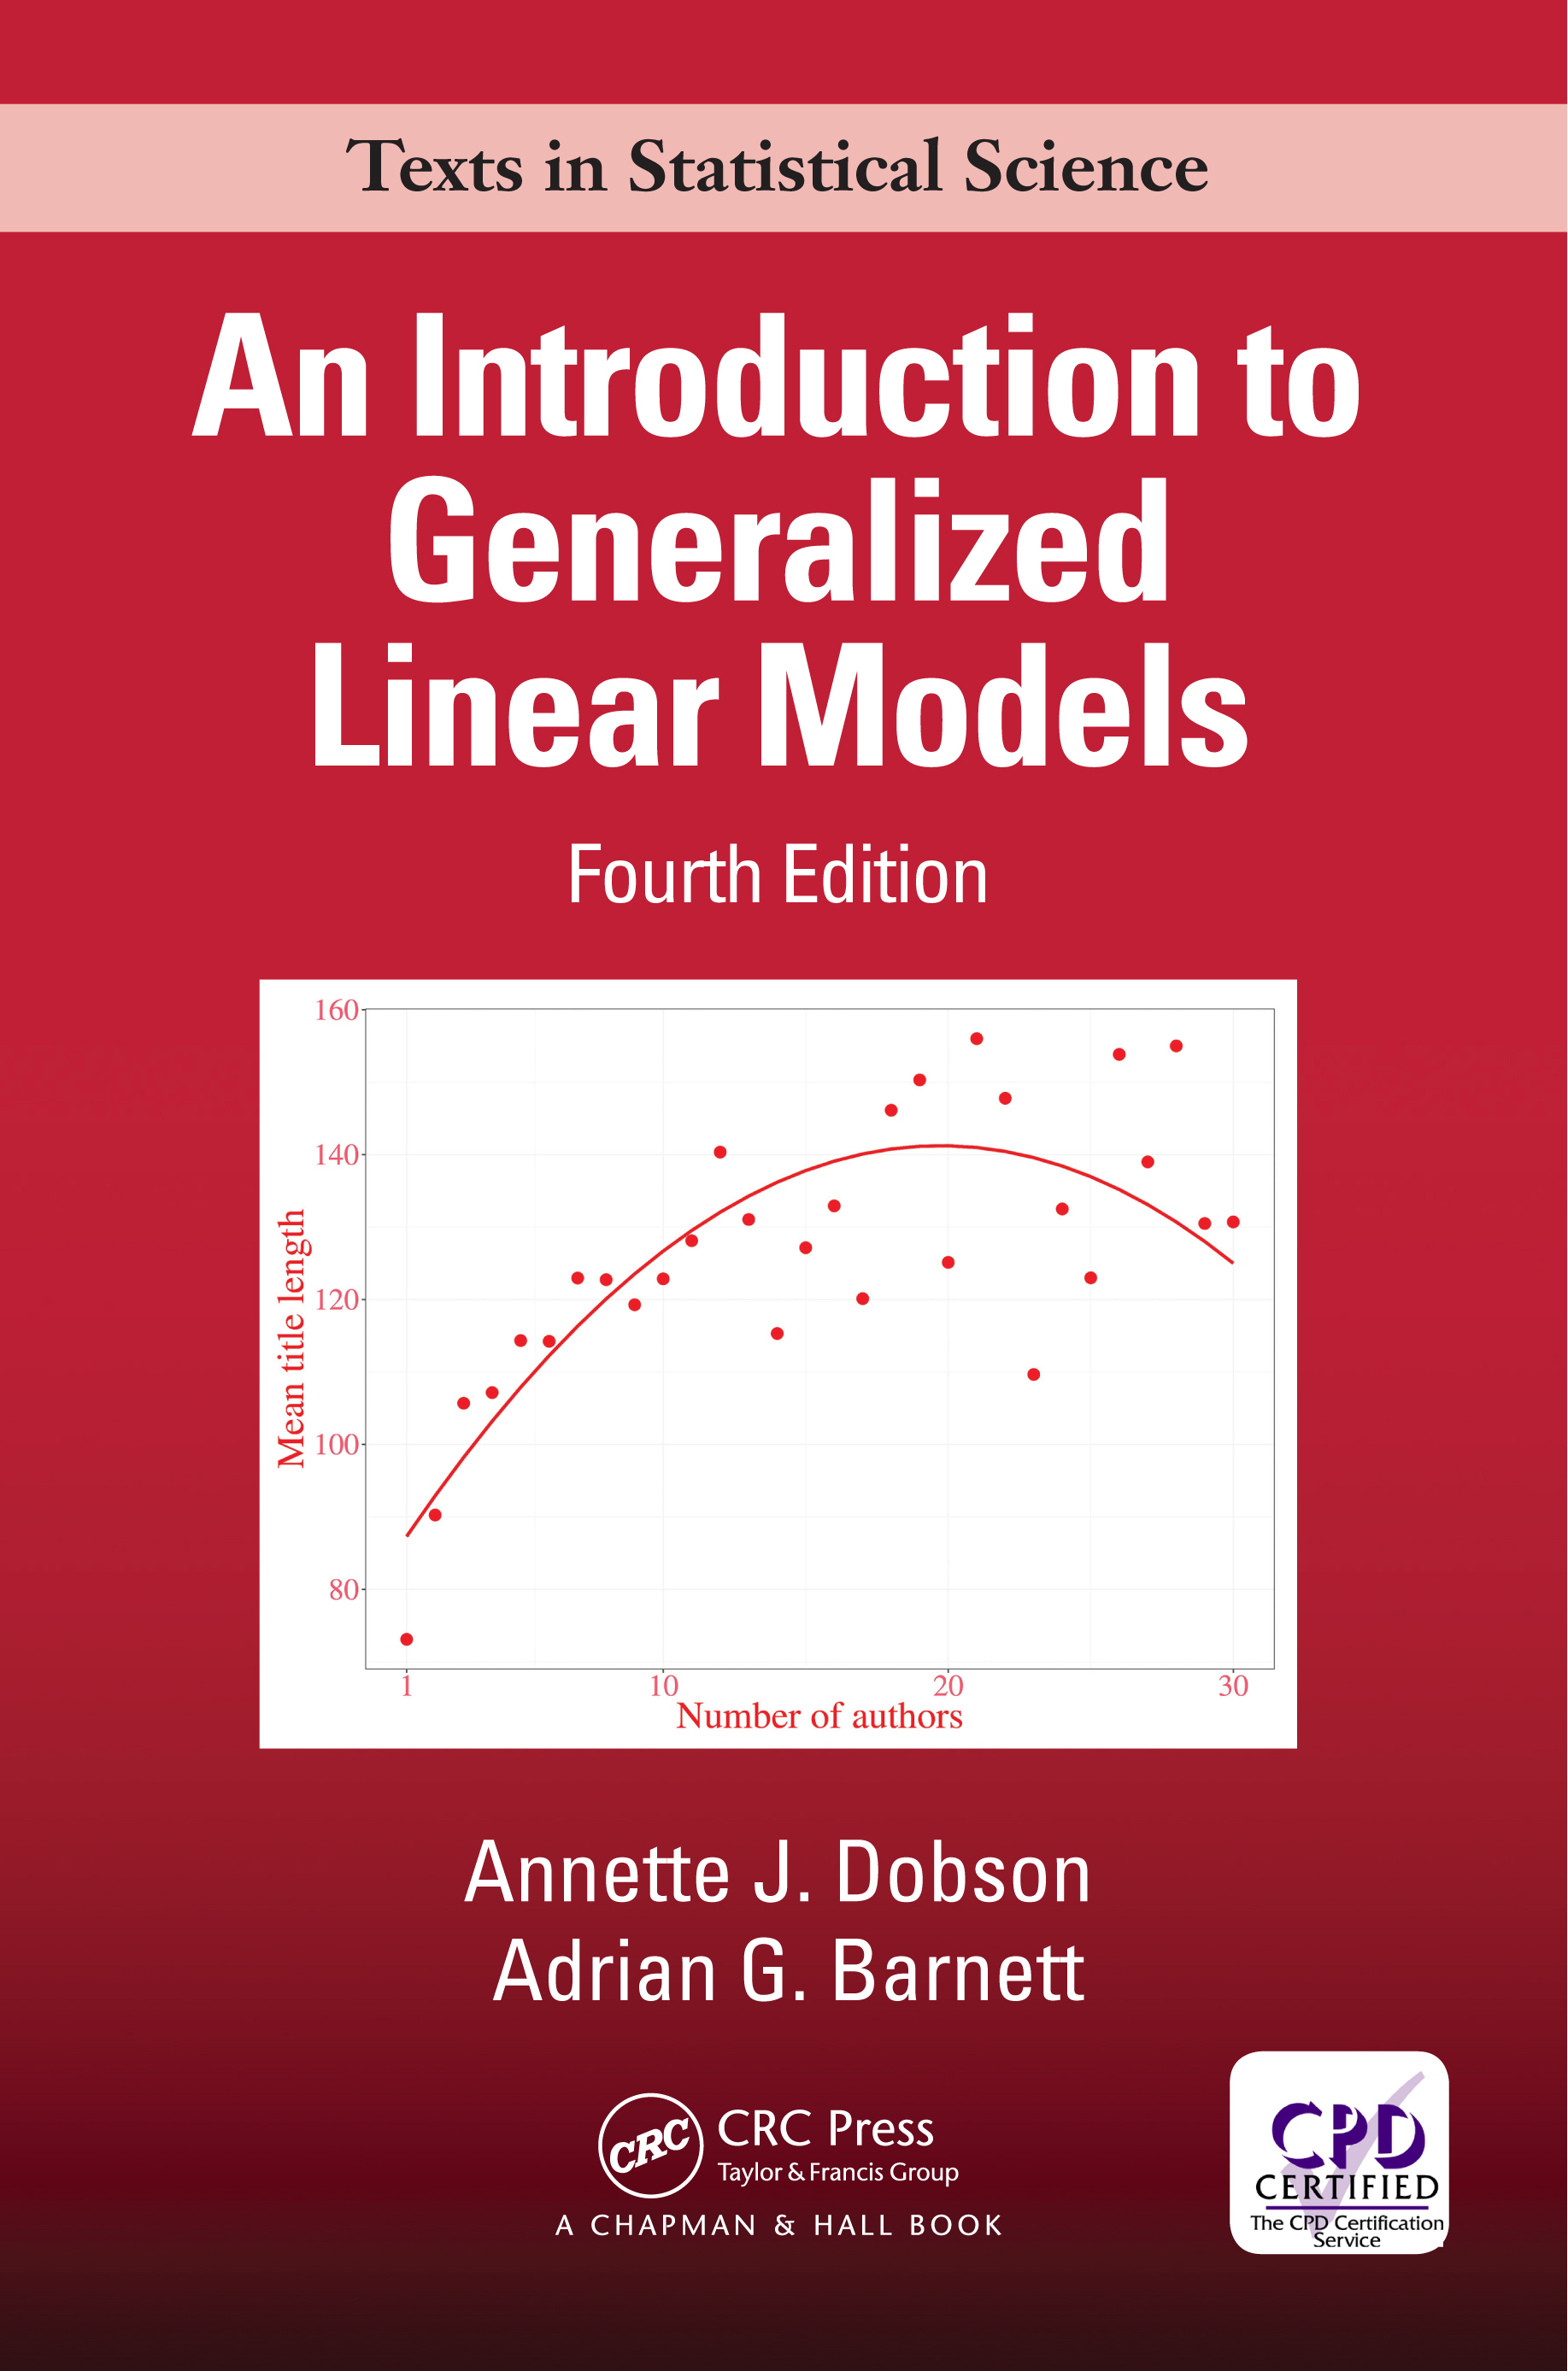 An Introduction to Generalized Linear Models